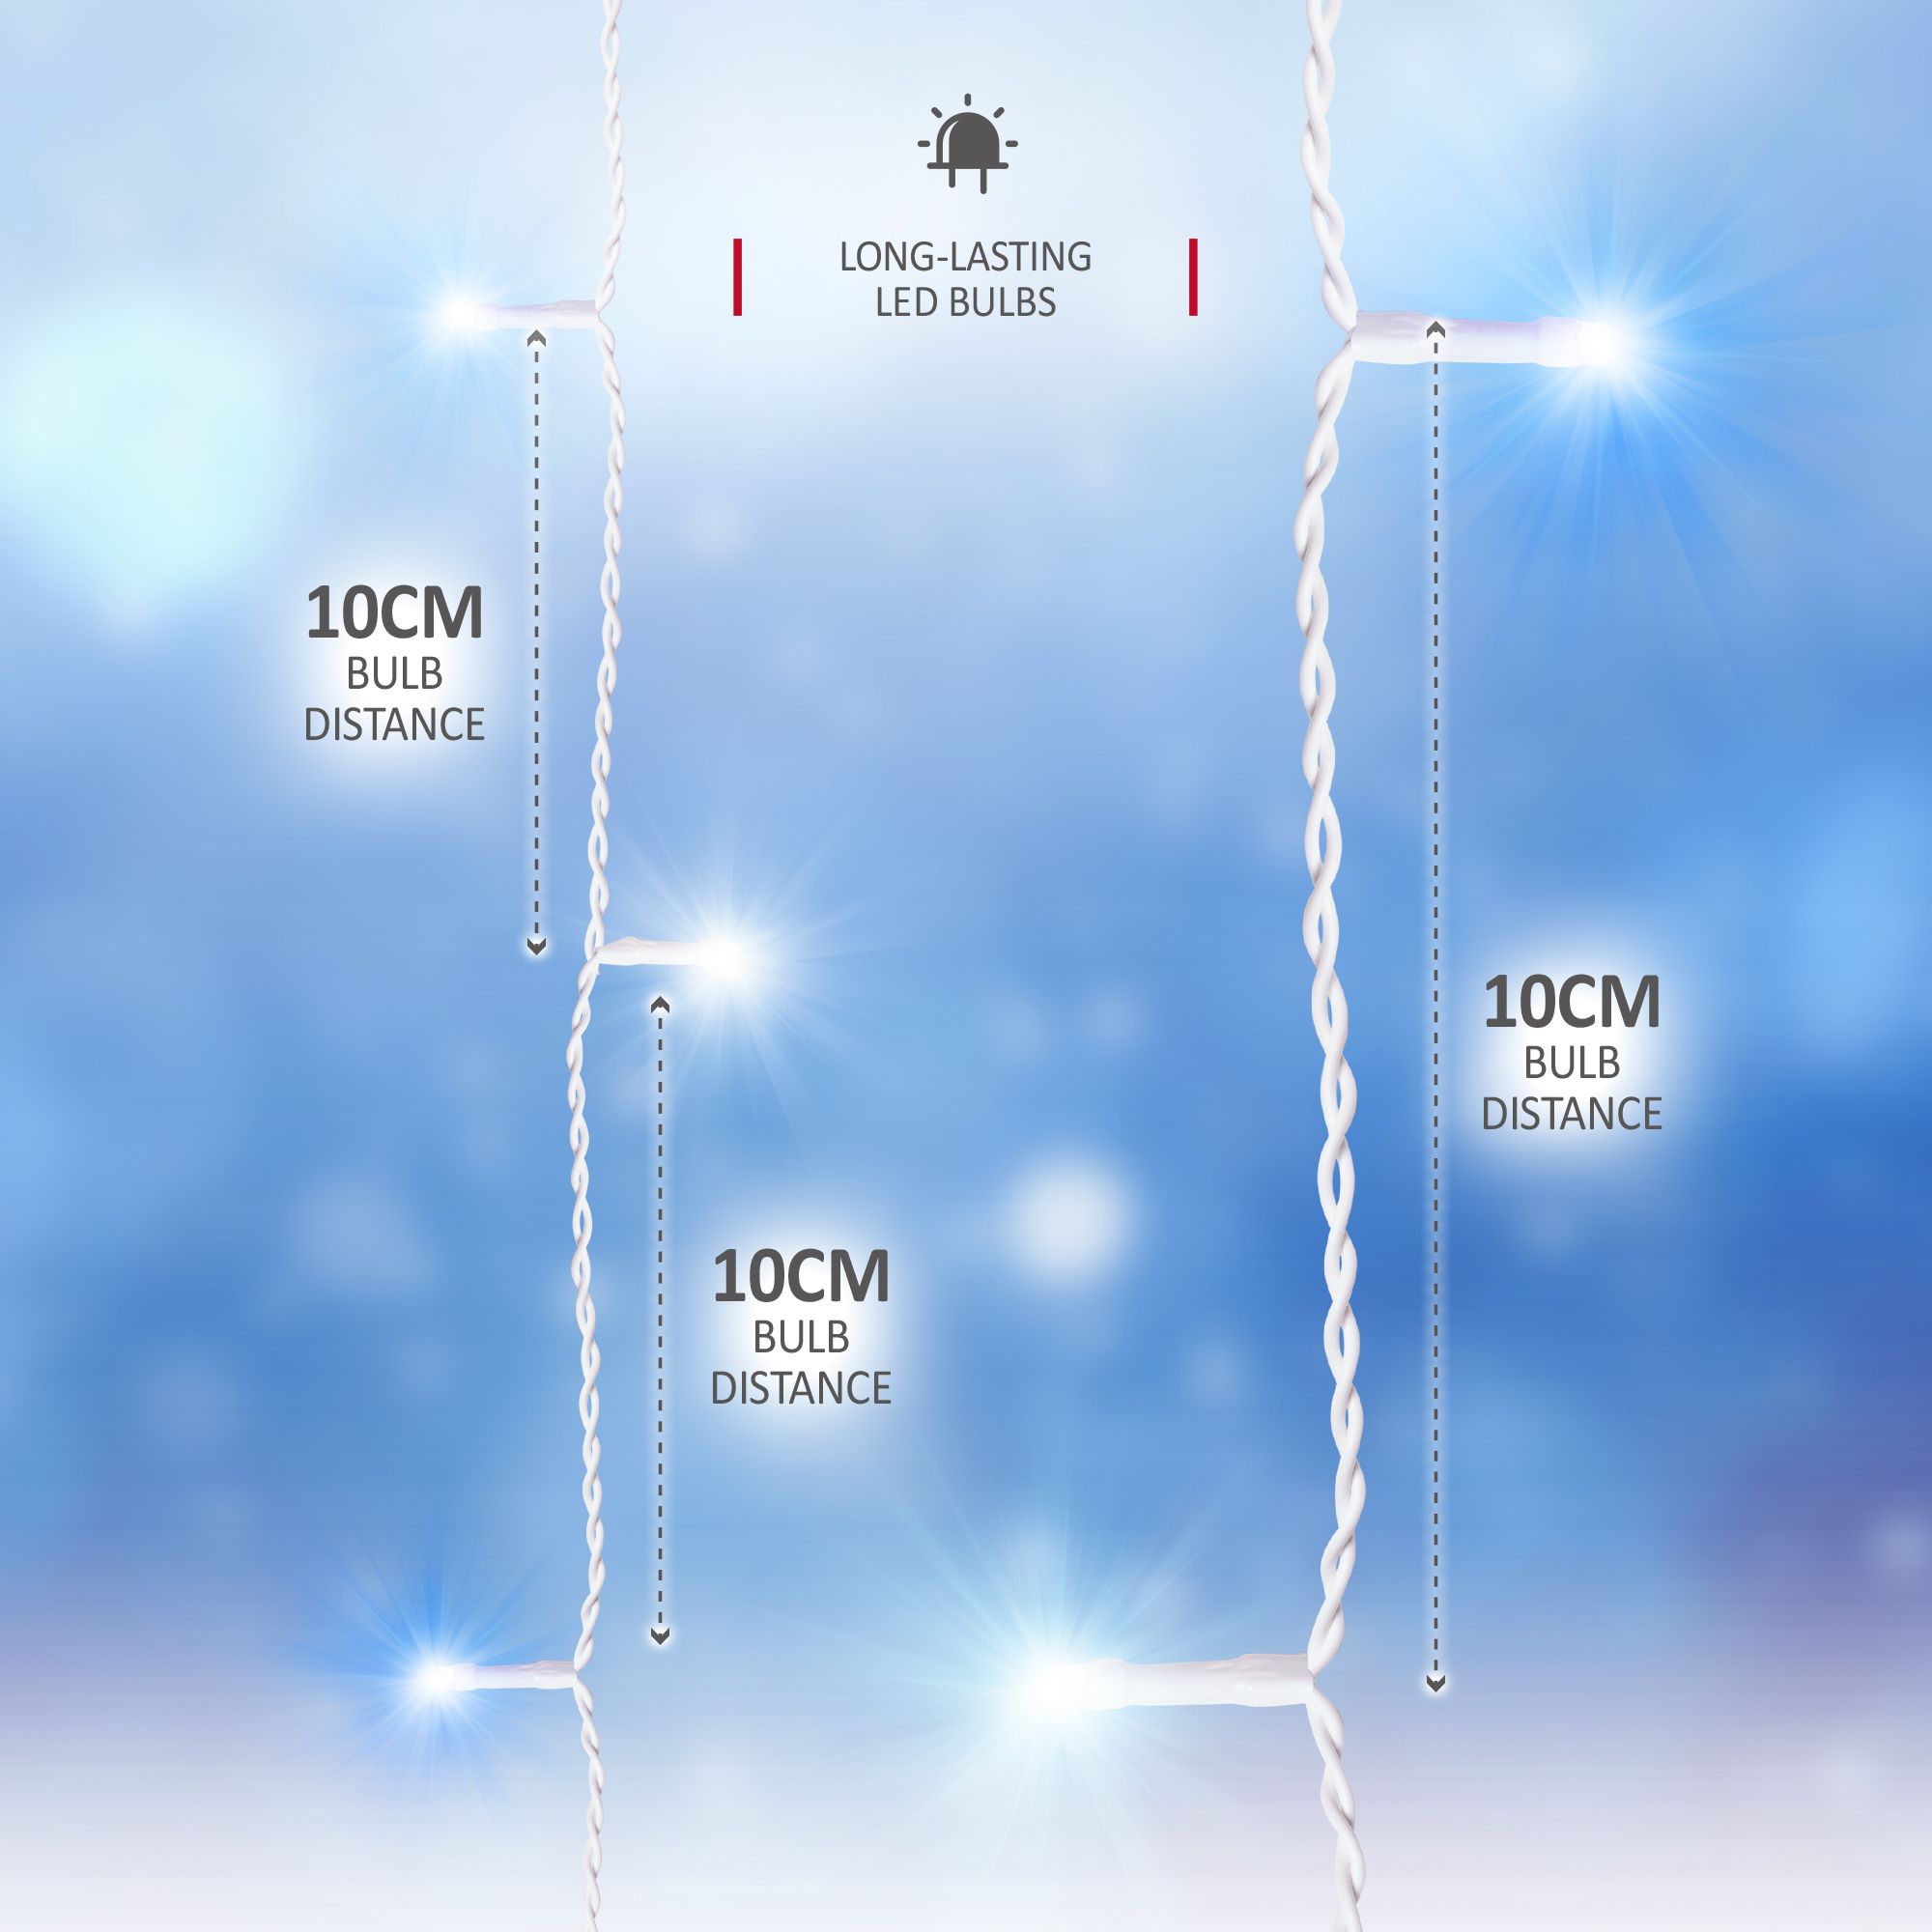 NETTA 360 LED Icicle Lights 10M Outdoor Christmas Lights - Blue & Cool White, with White Cable